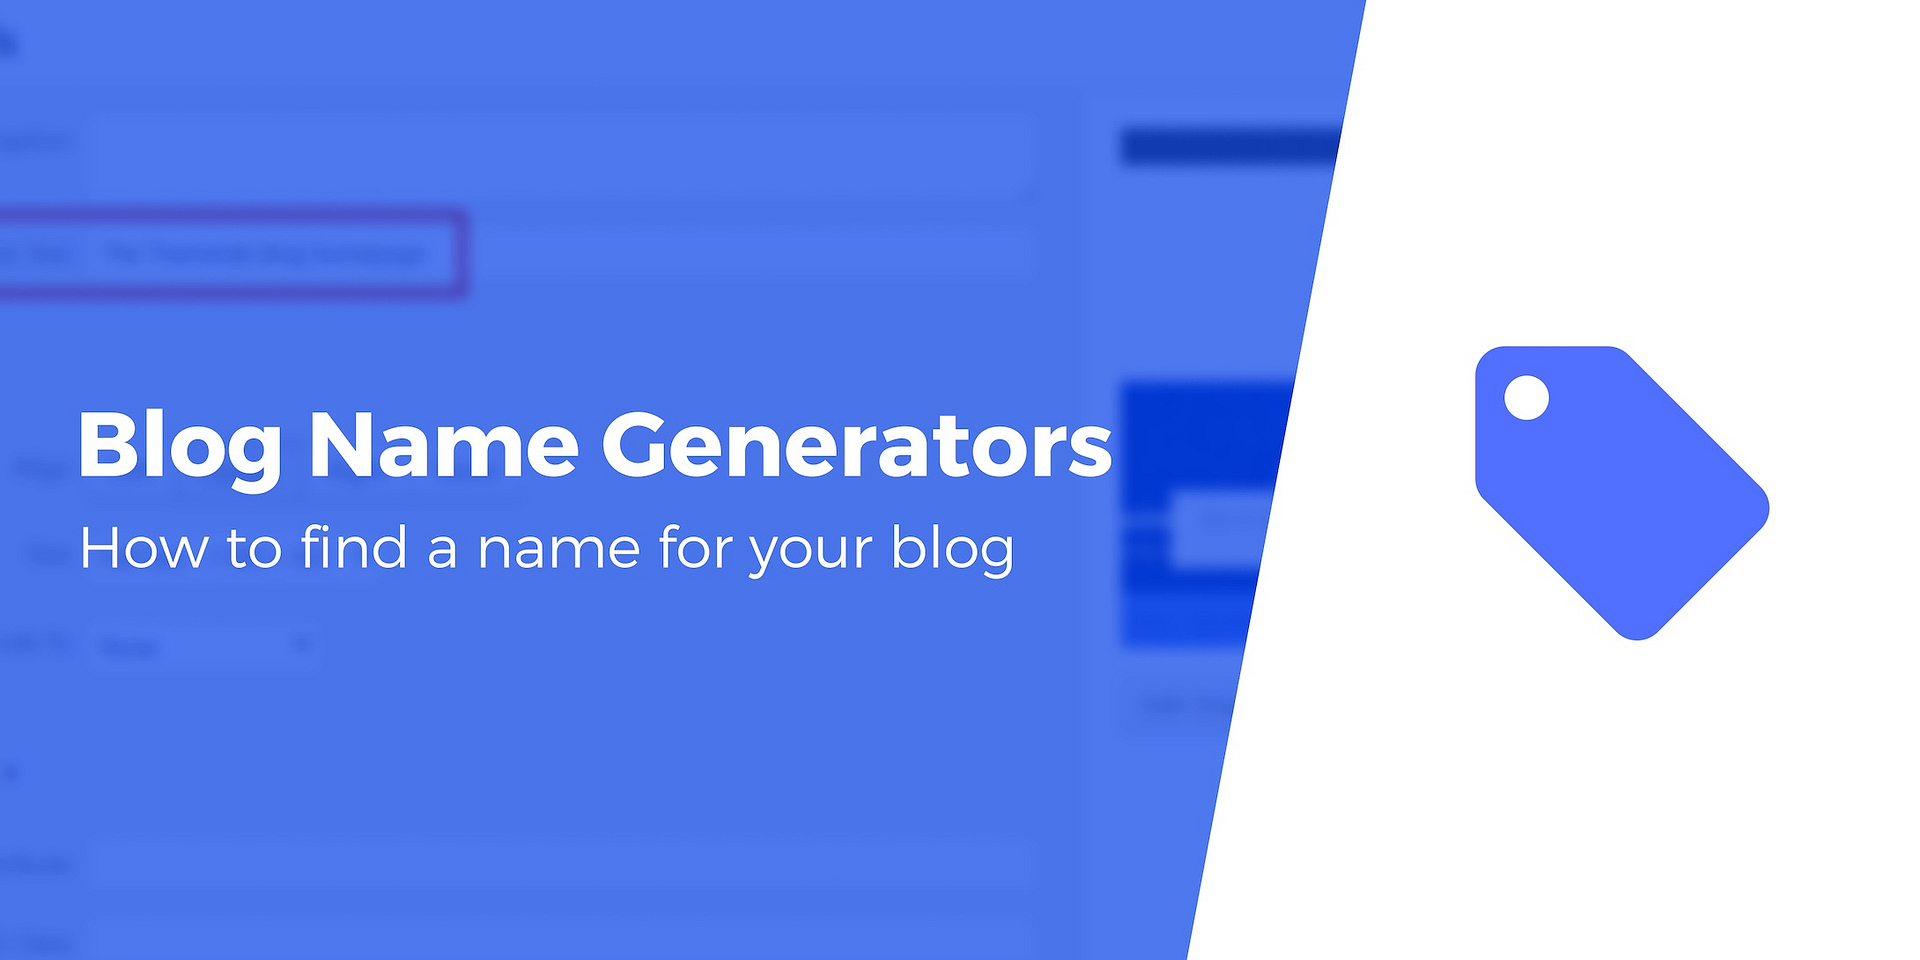 9 Best Blog Name Generators To Find Good Blog Name Ideas In 2020